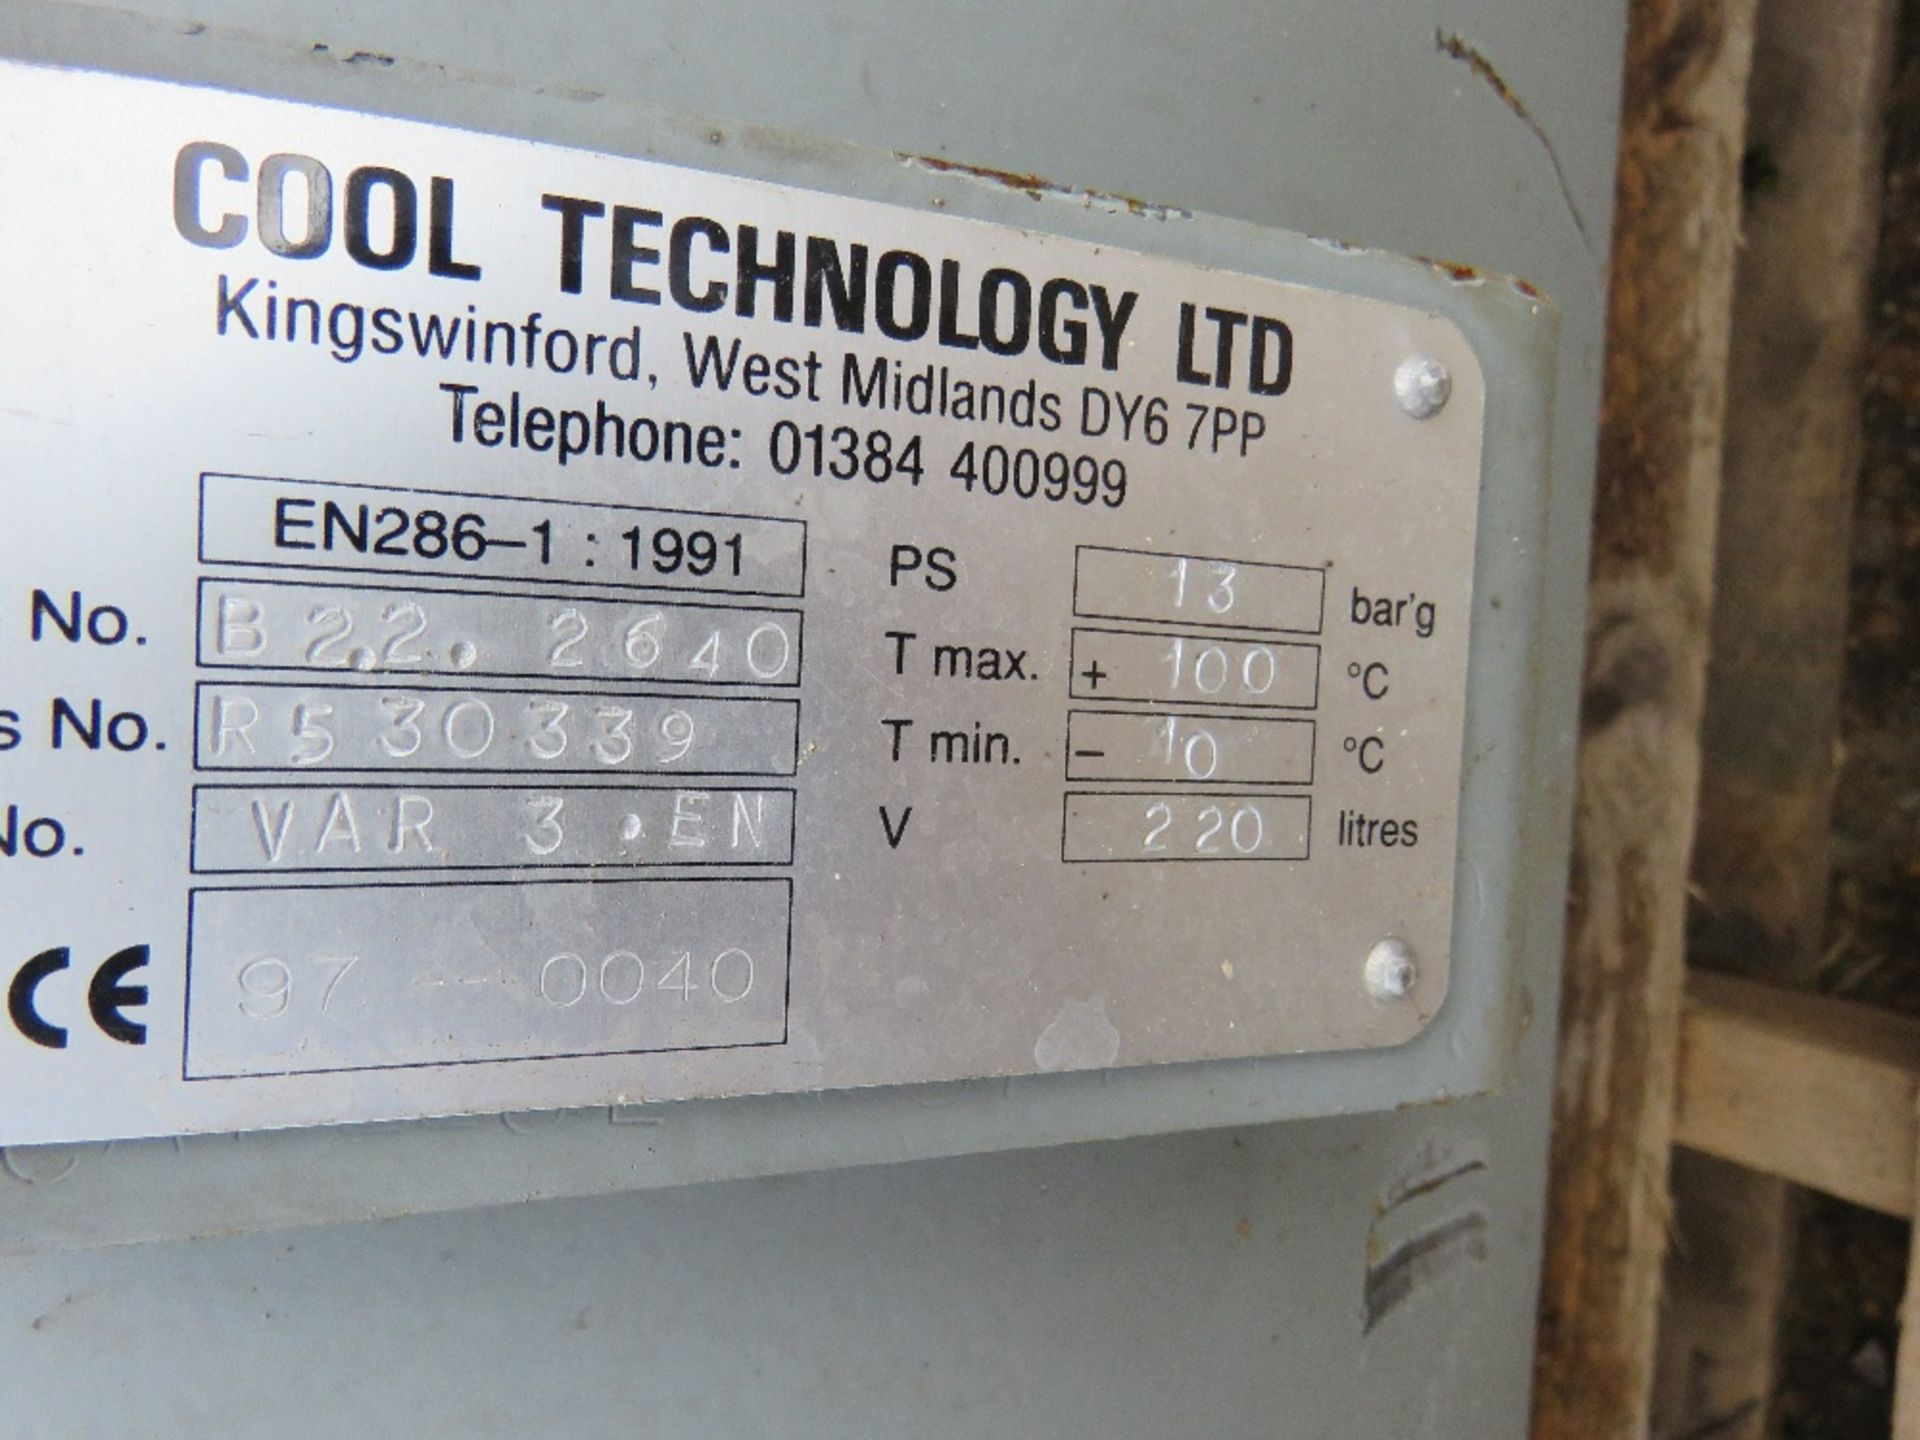 COOL TECHNOLOGY 13 BAR RATED 220LITRE AIR RECEIVER UNIT, DIRECT FROM WORKSHOP CLOSURE. - Image 4 of 4